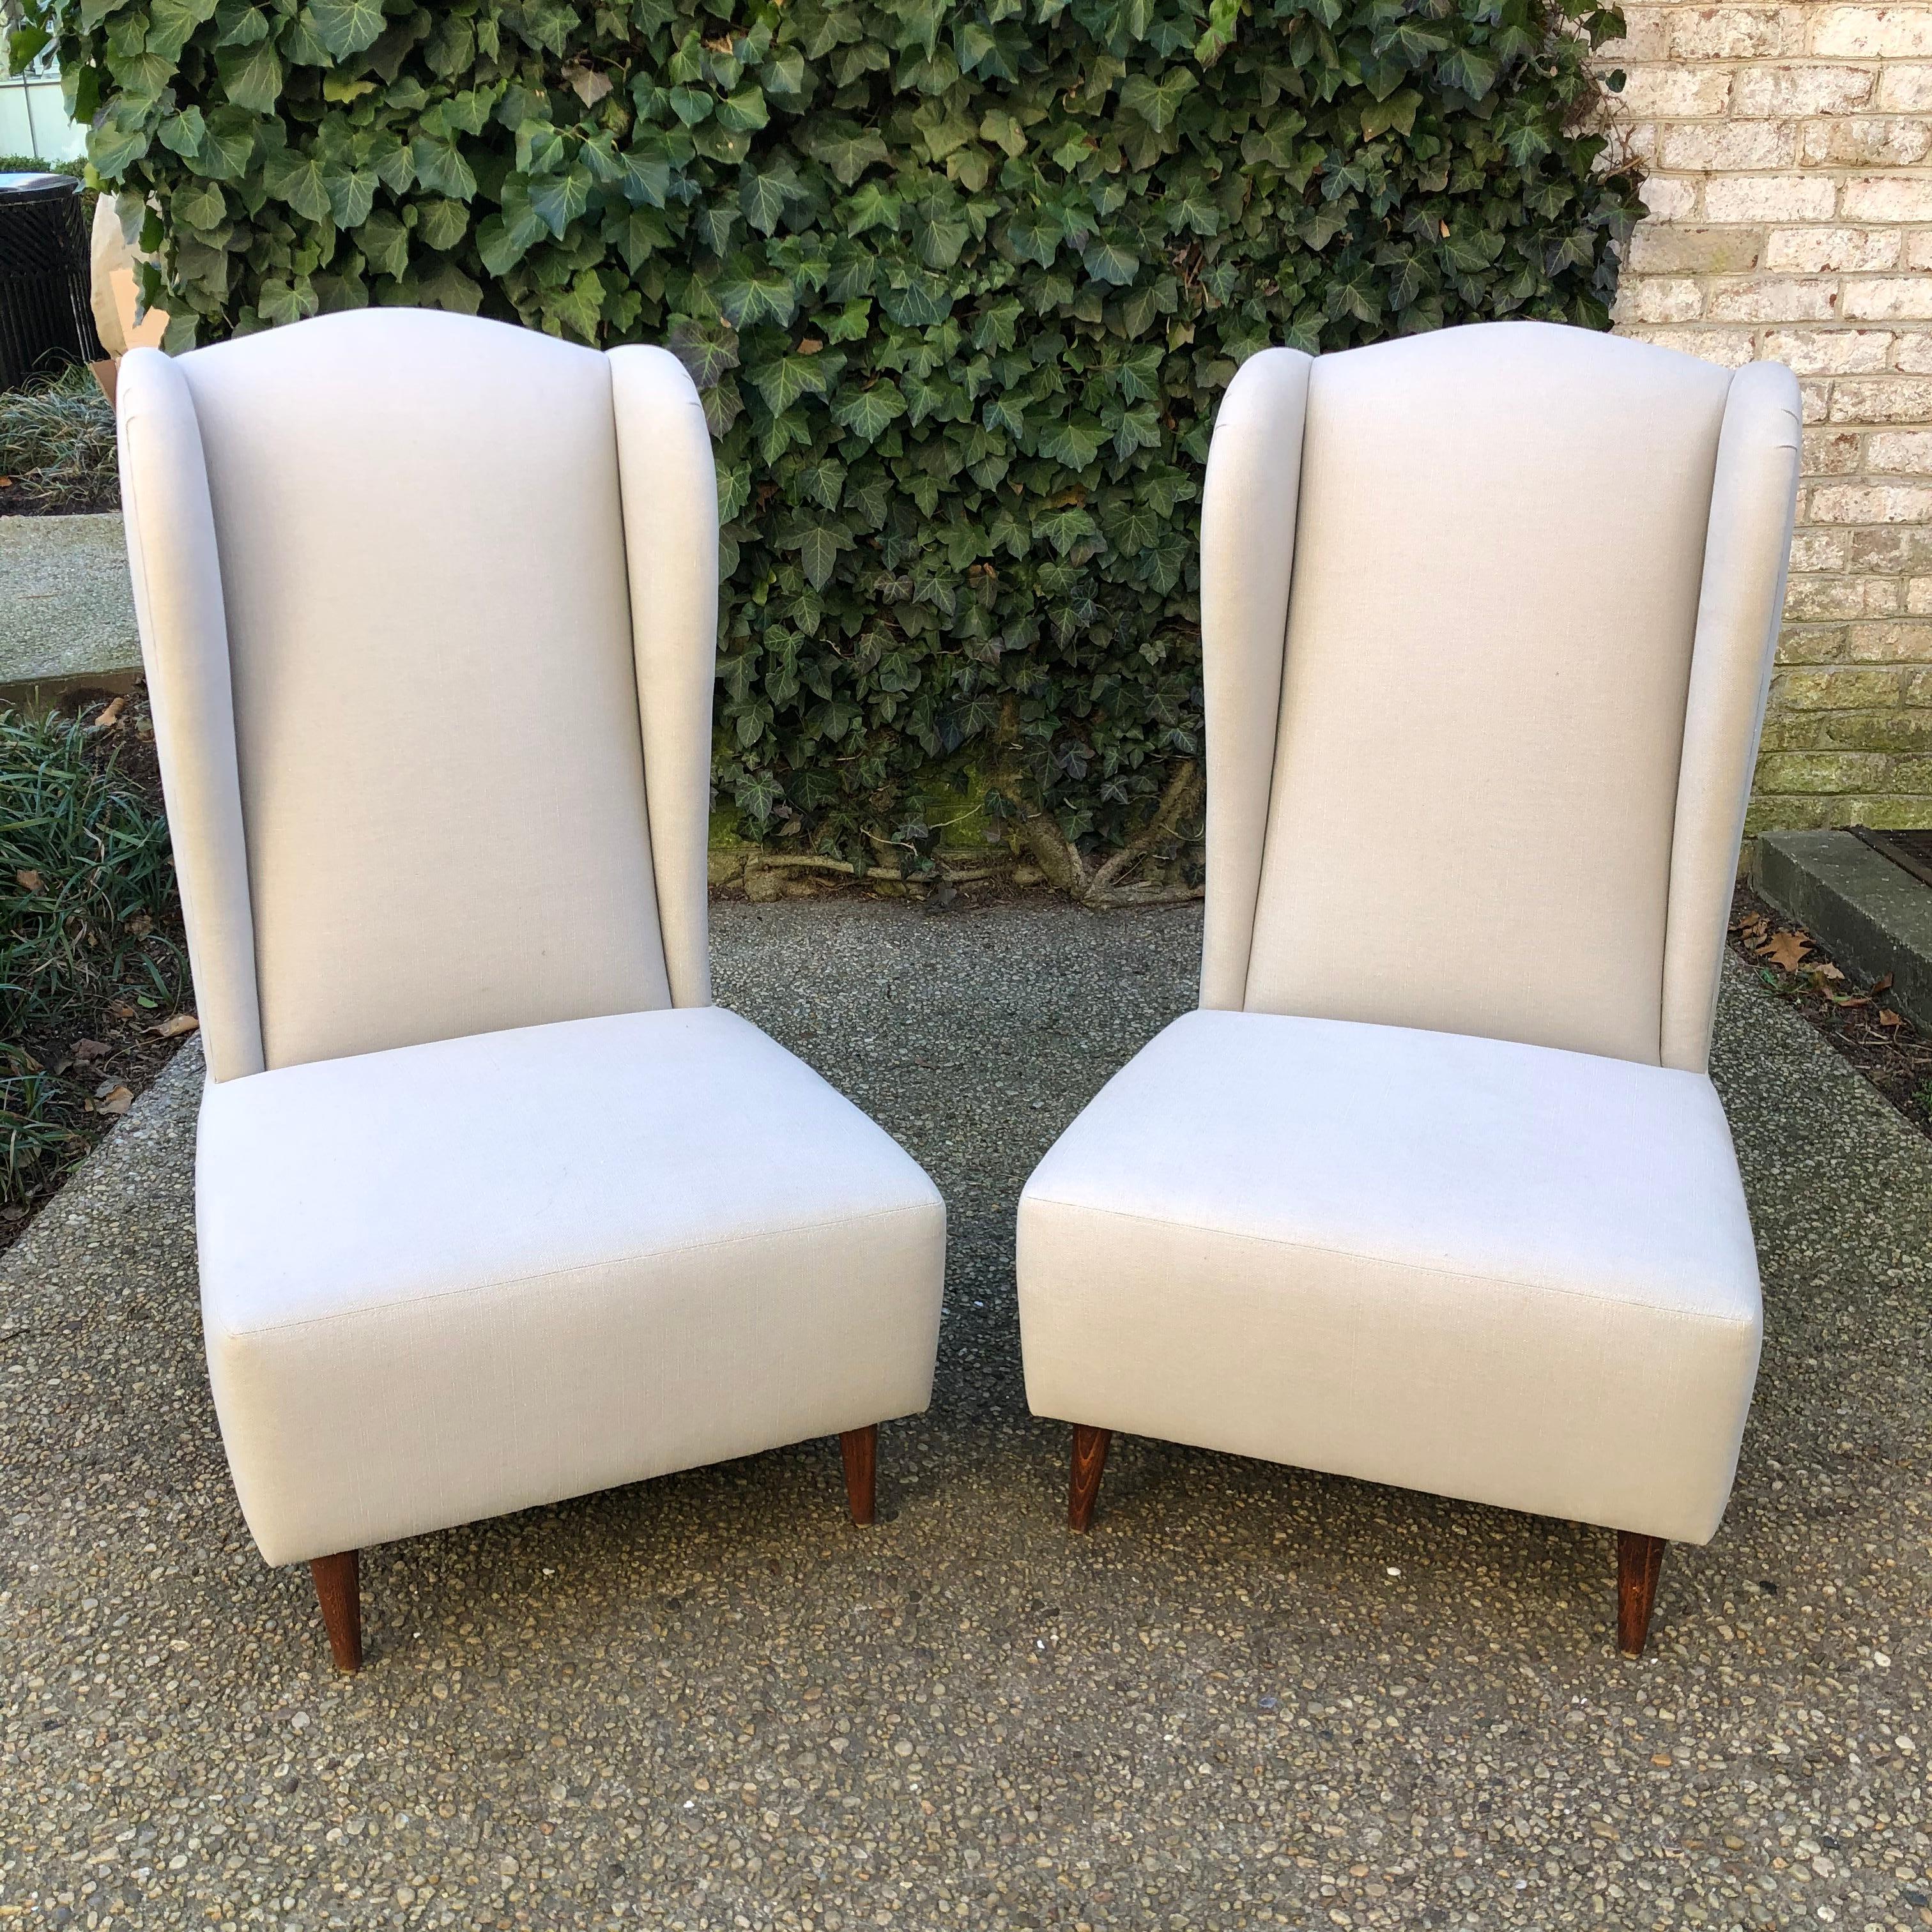 Unique pair of armless wing back slipper chairs newly upholstered in natural linen.